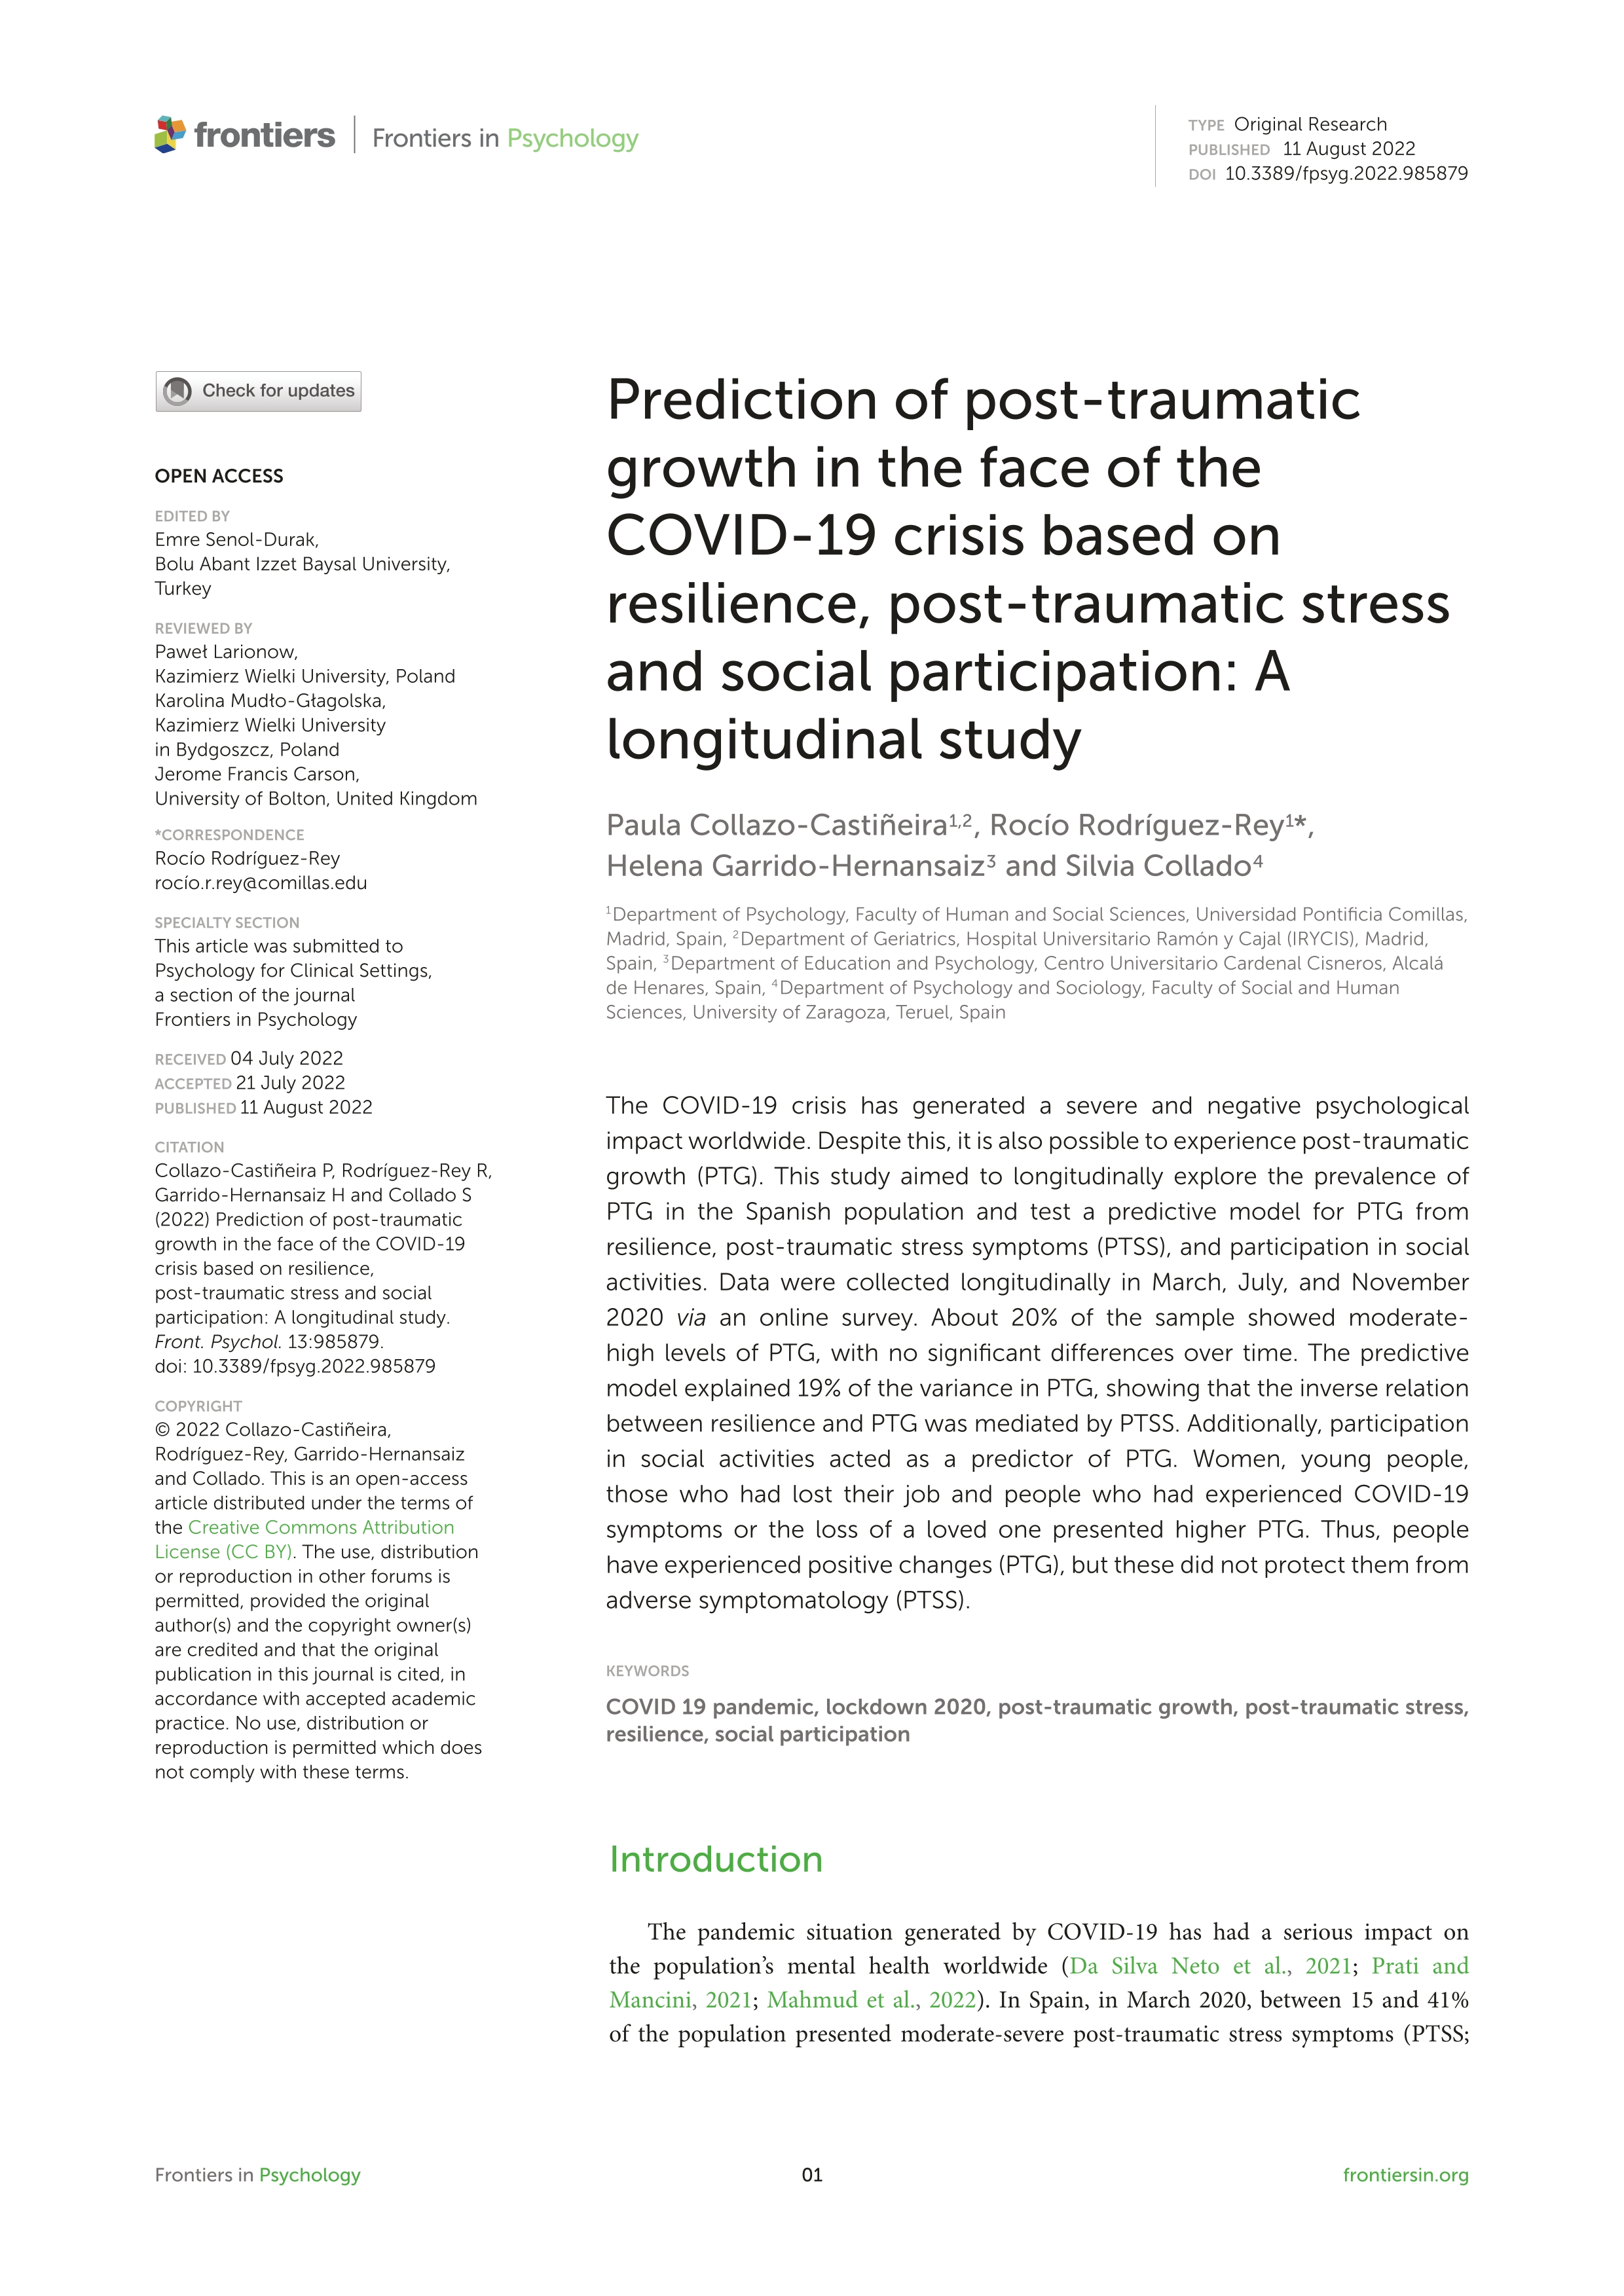 Prediction of post-traumatic growth in the face of the COVID-19 crisis based on resilience, post-traumatic stress and social participation: A longitudinal study